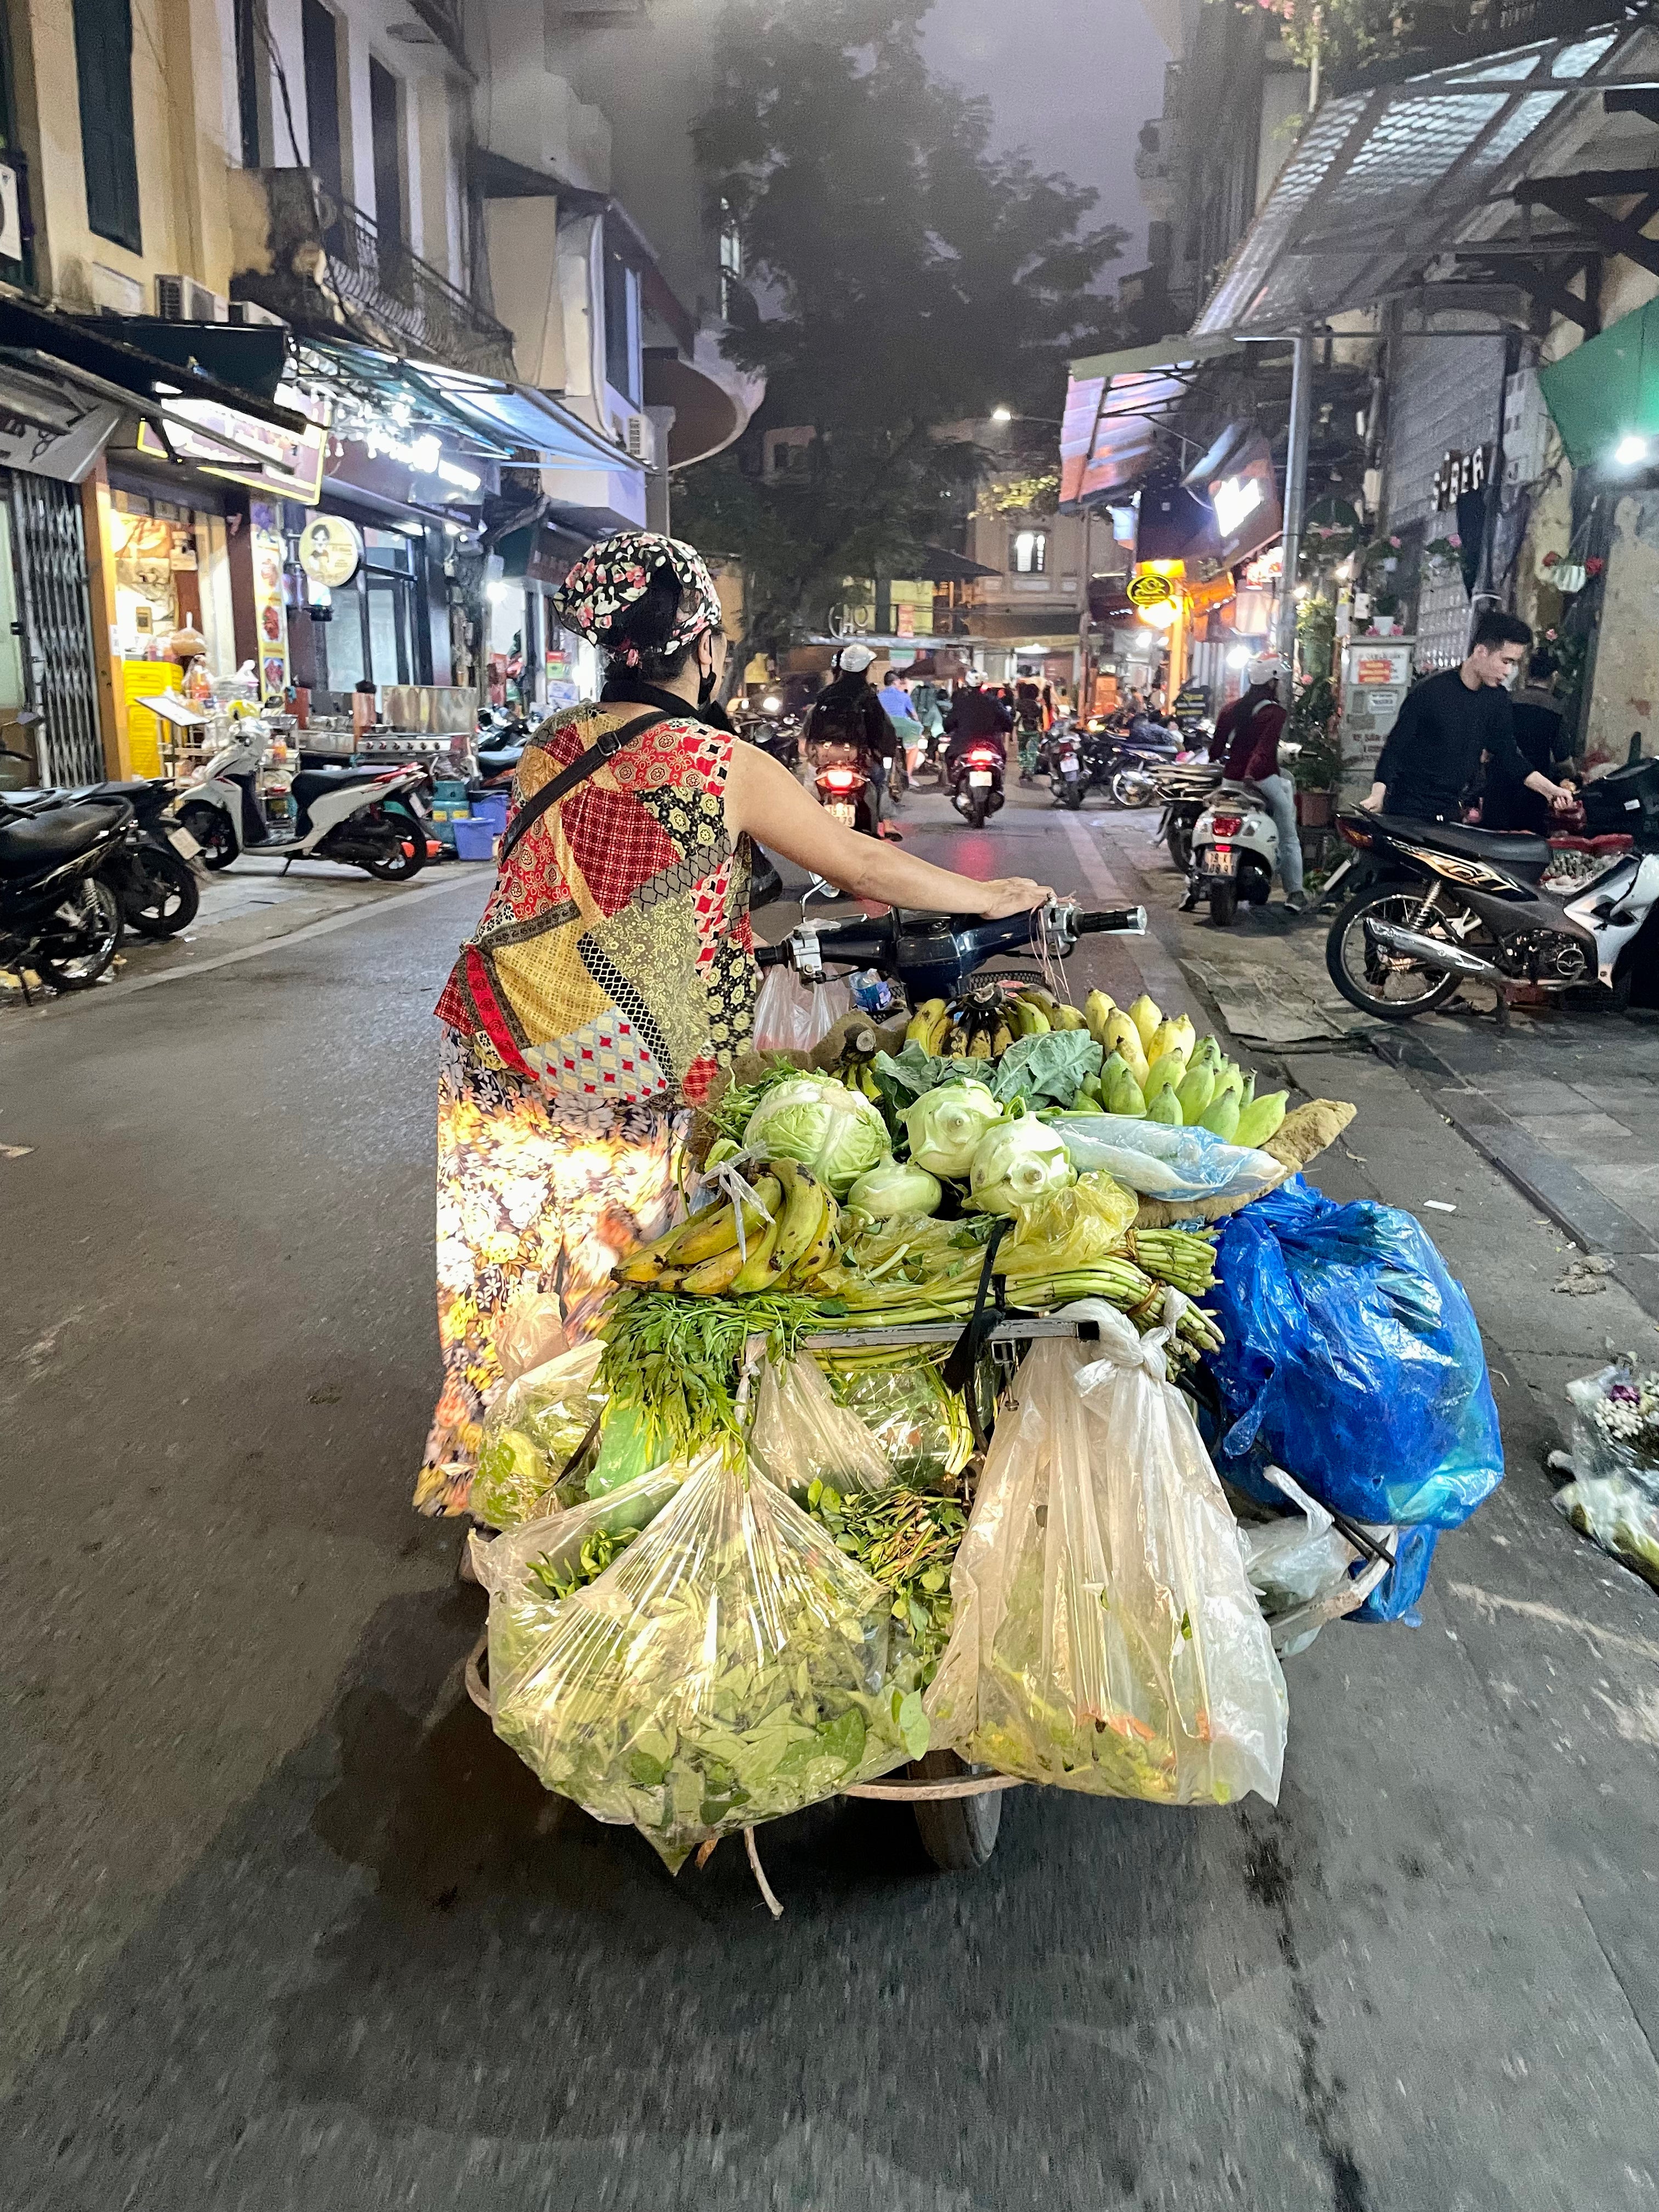 Woman pushing motorbike oiled with food to sell